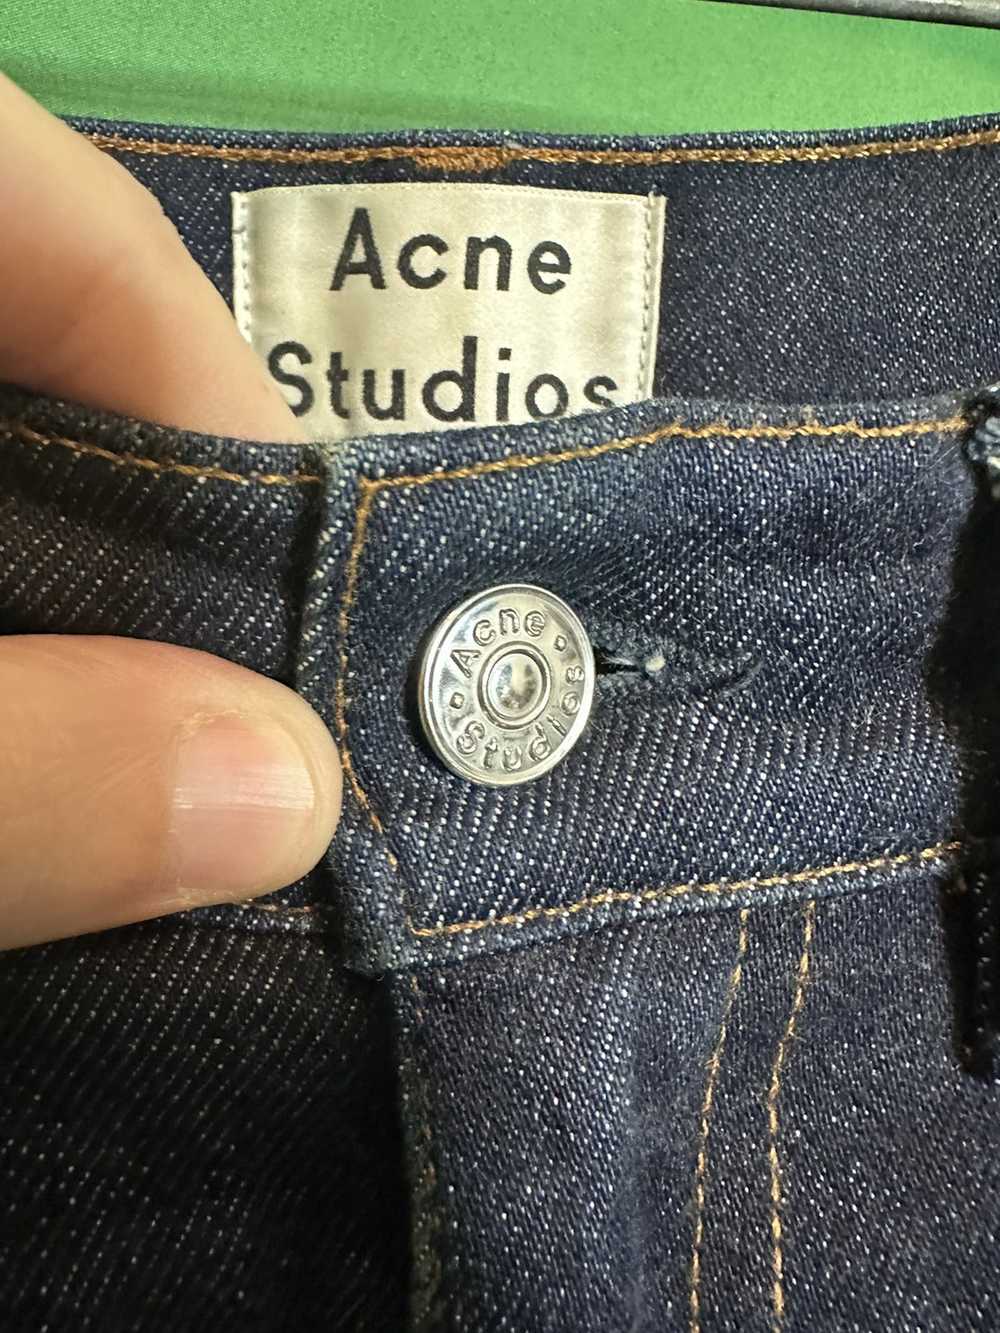 Acne Studios Ace model slim blue jeans made in It… - image 5